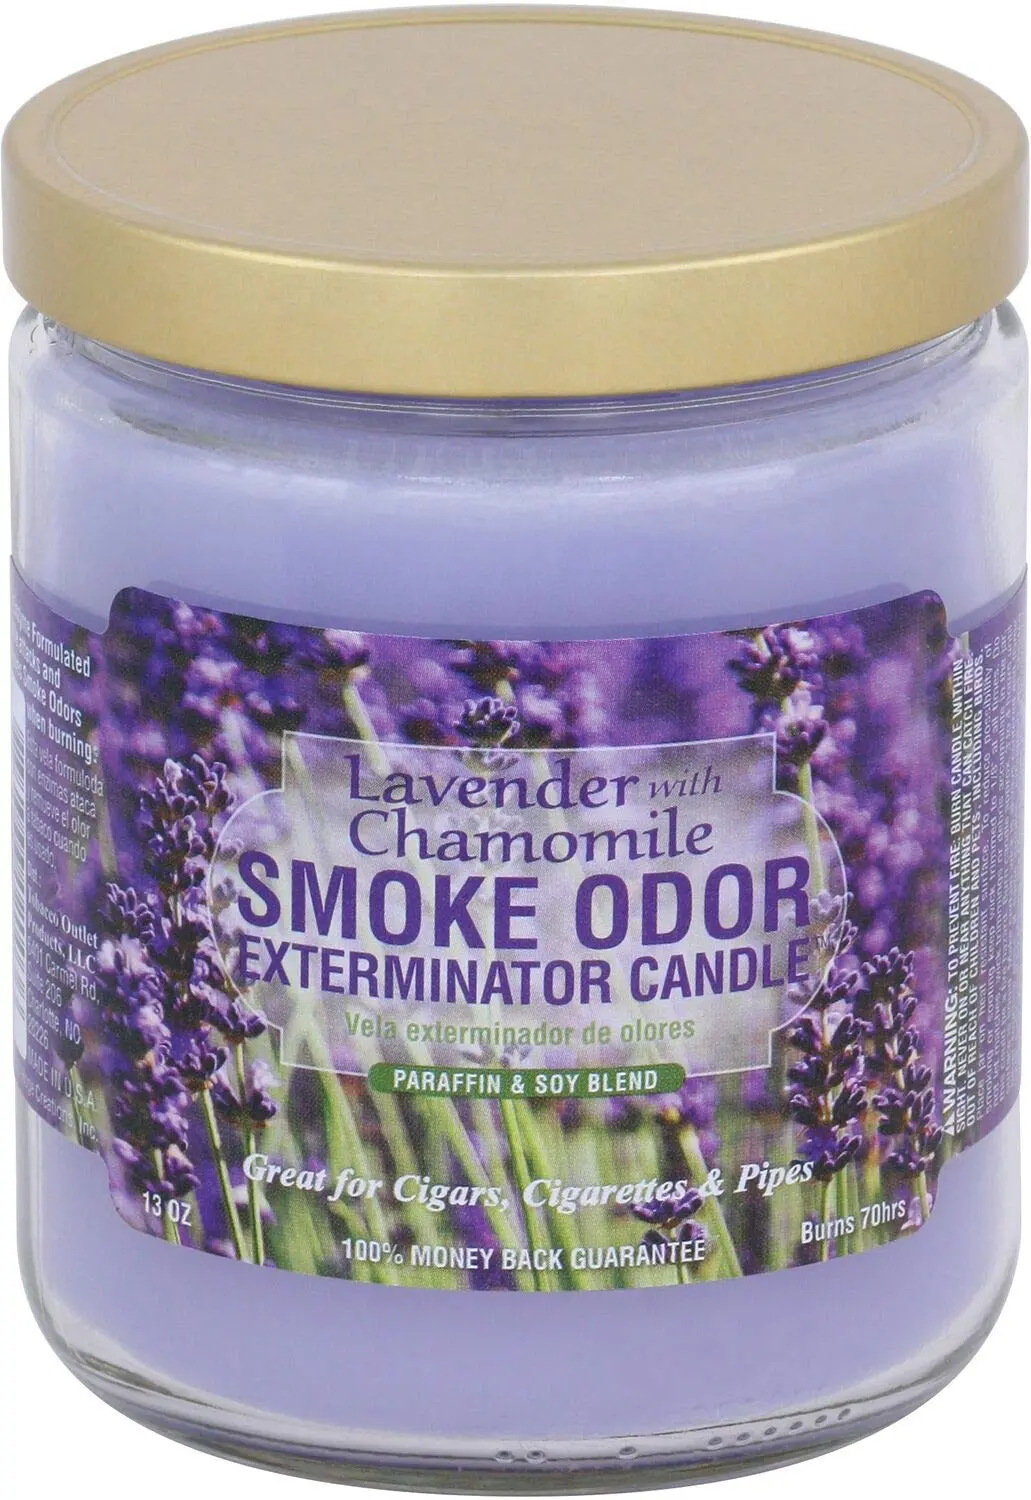 smoked lavender candle - Does lavender candle smell good